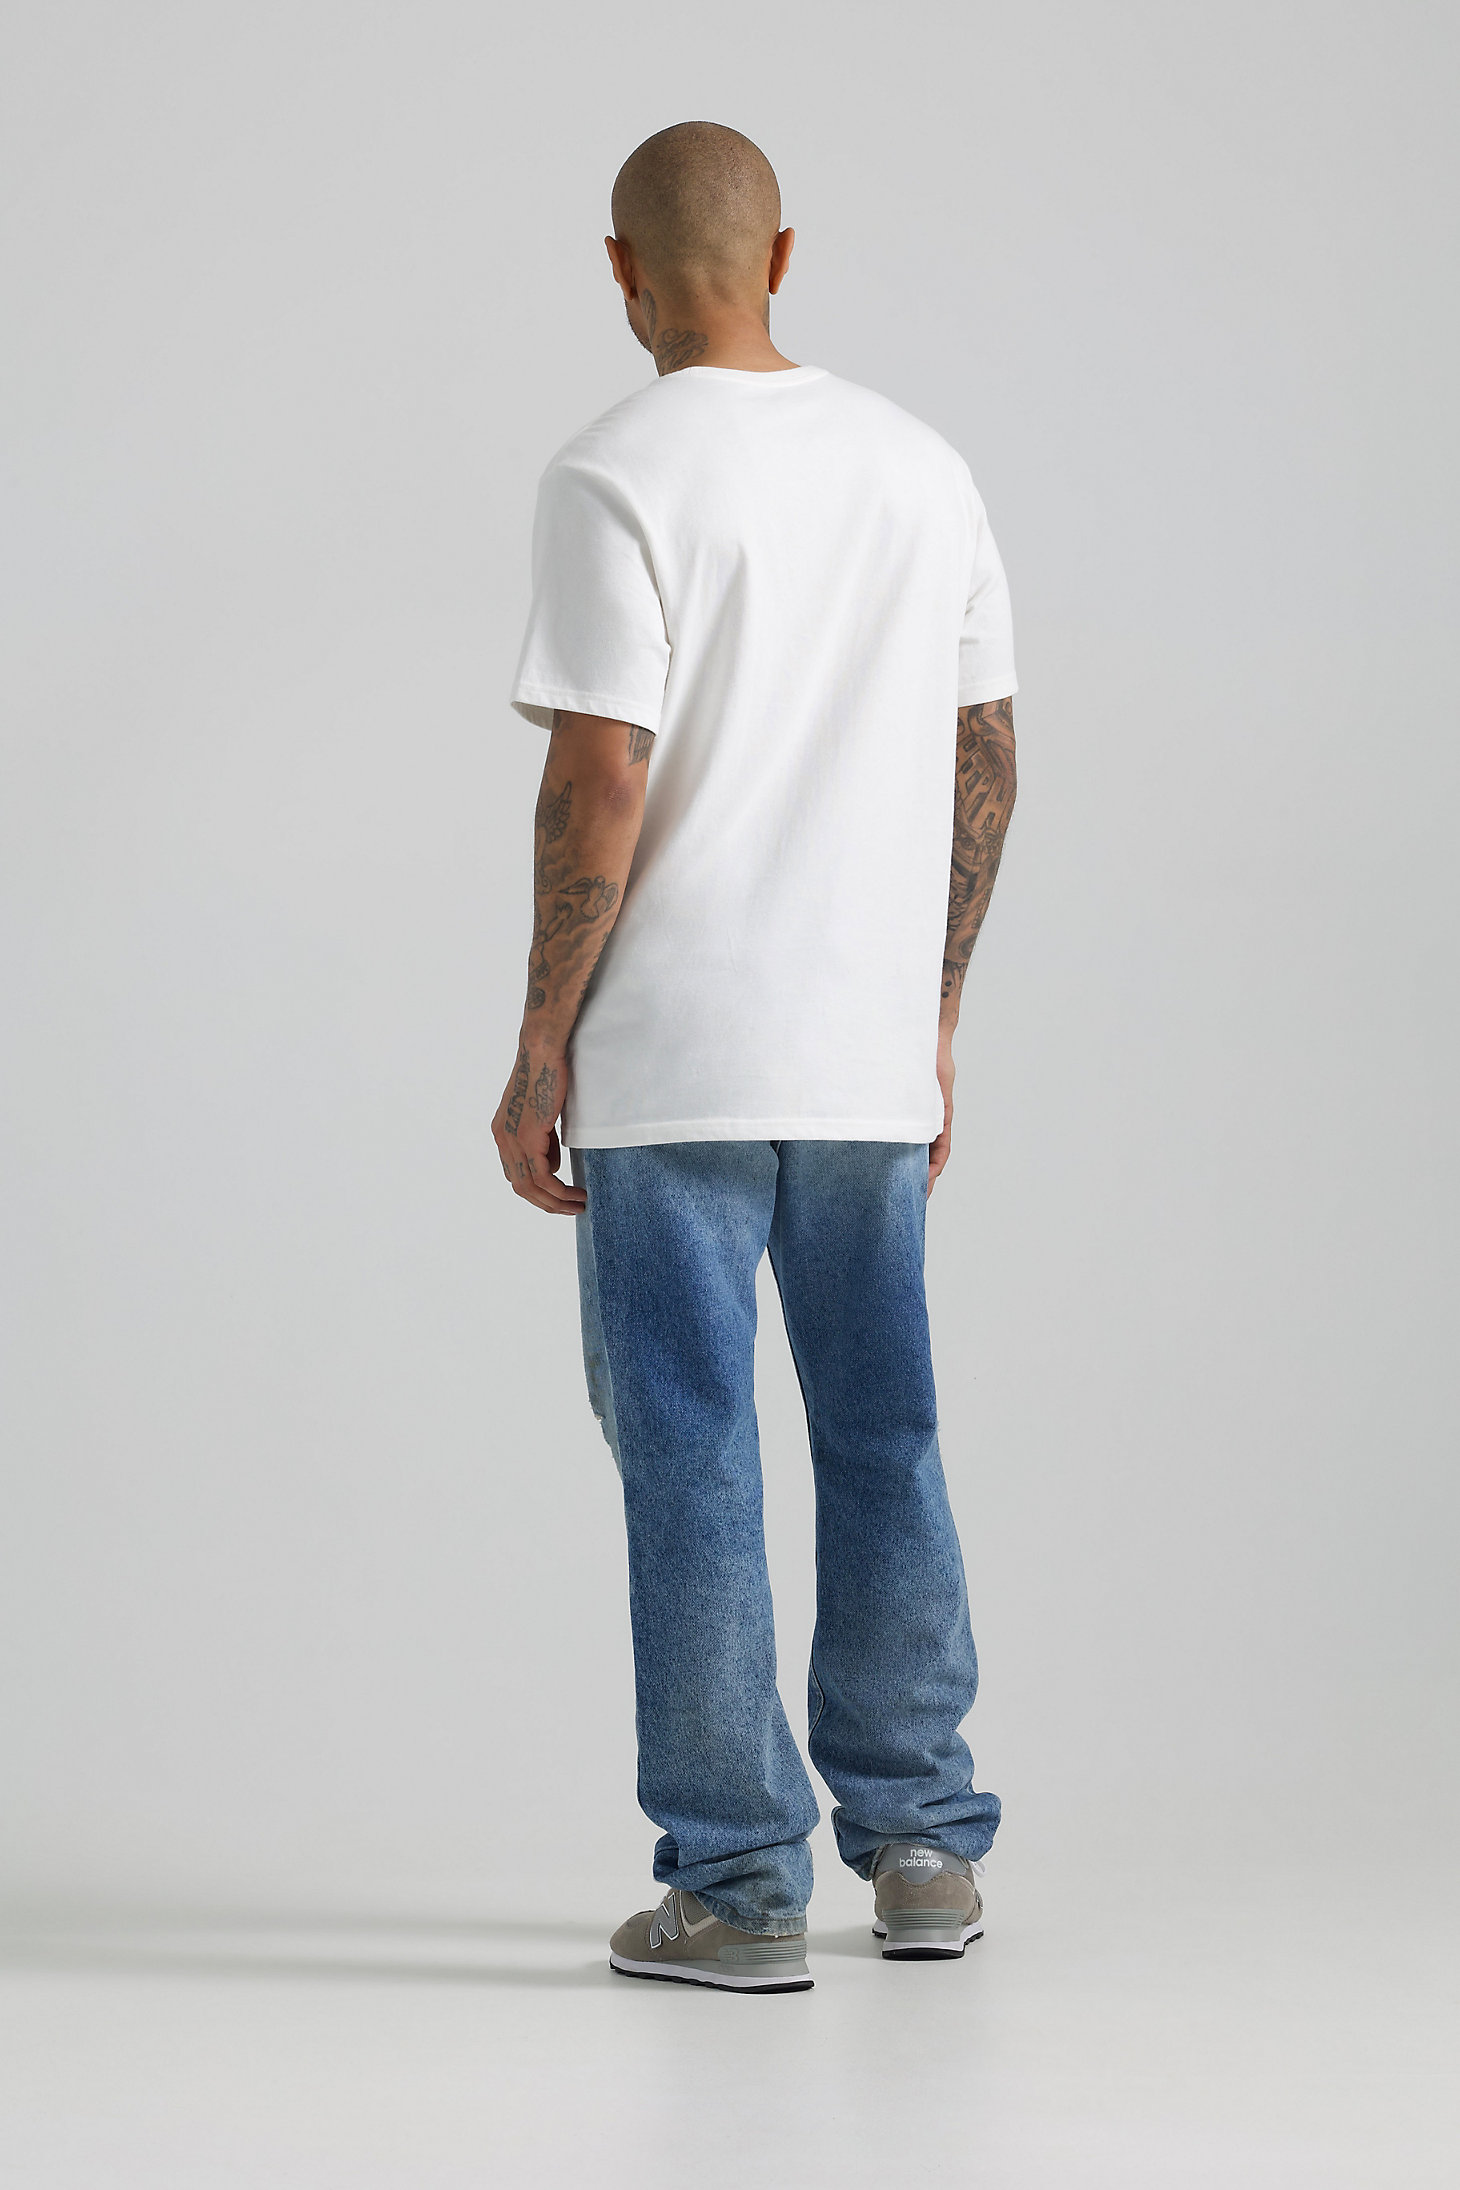 Men's Lee x BE@RBRICK Buddy Lee Line Up Relaxed Fit Tee in Marshmallow alternative view 3